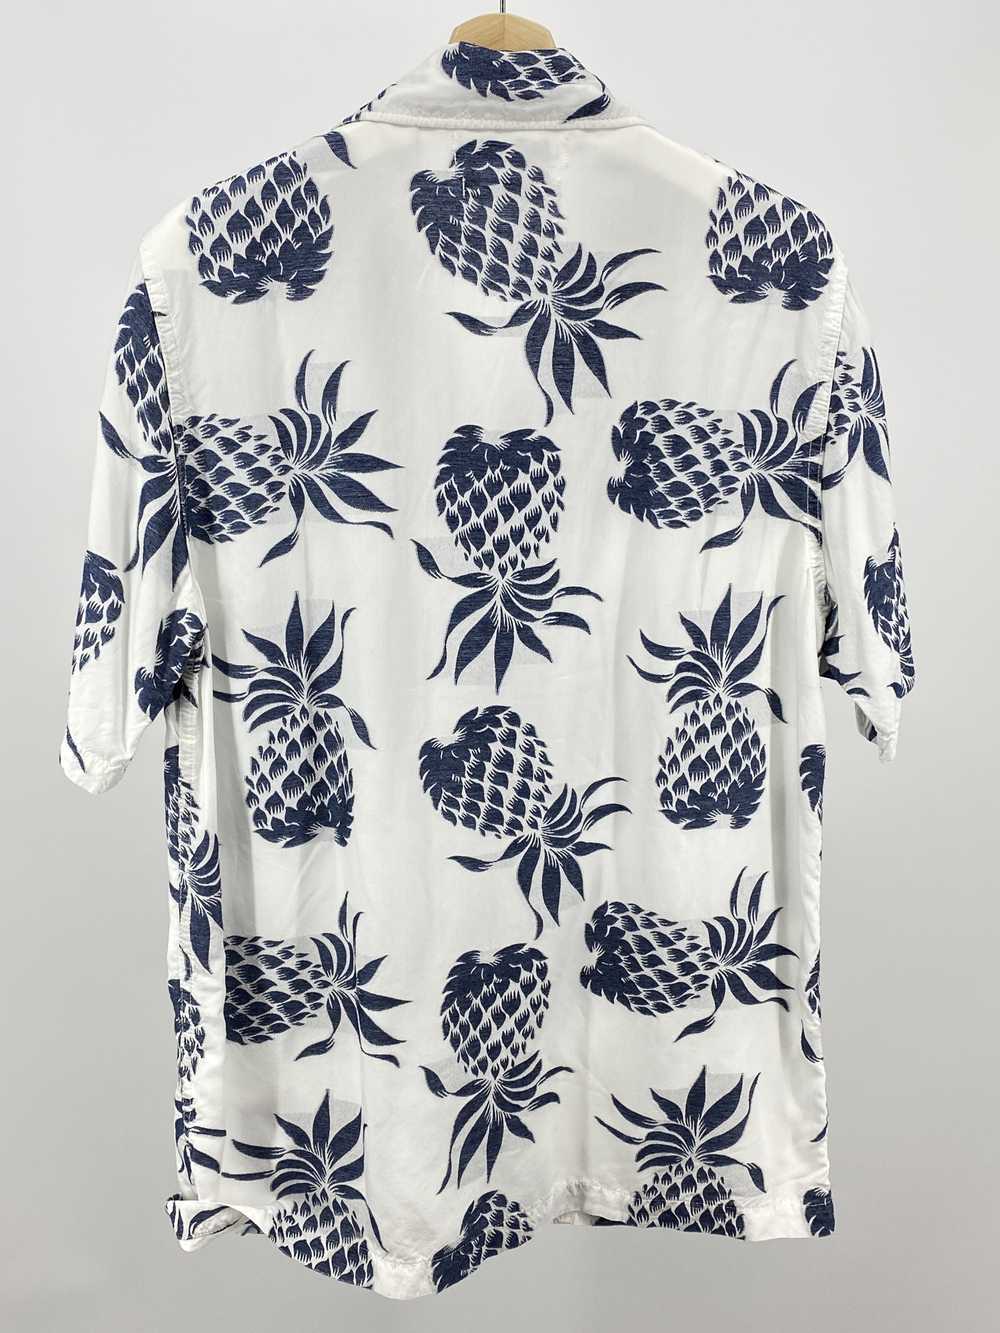 Remi Relief - Pineapple Camp Shirt - image 5